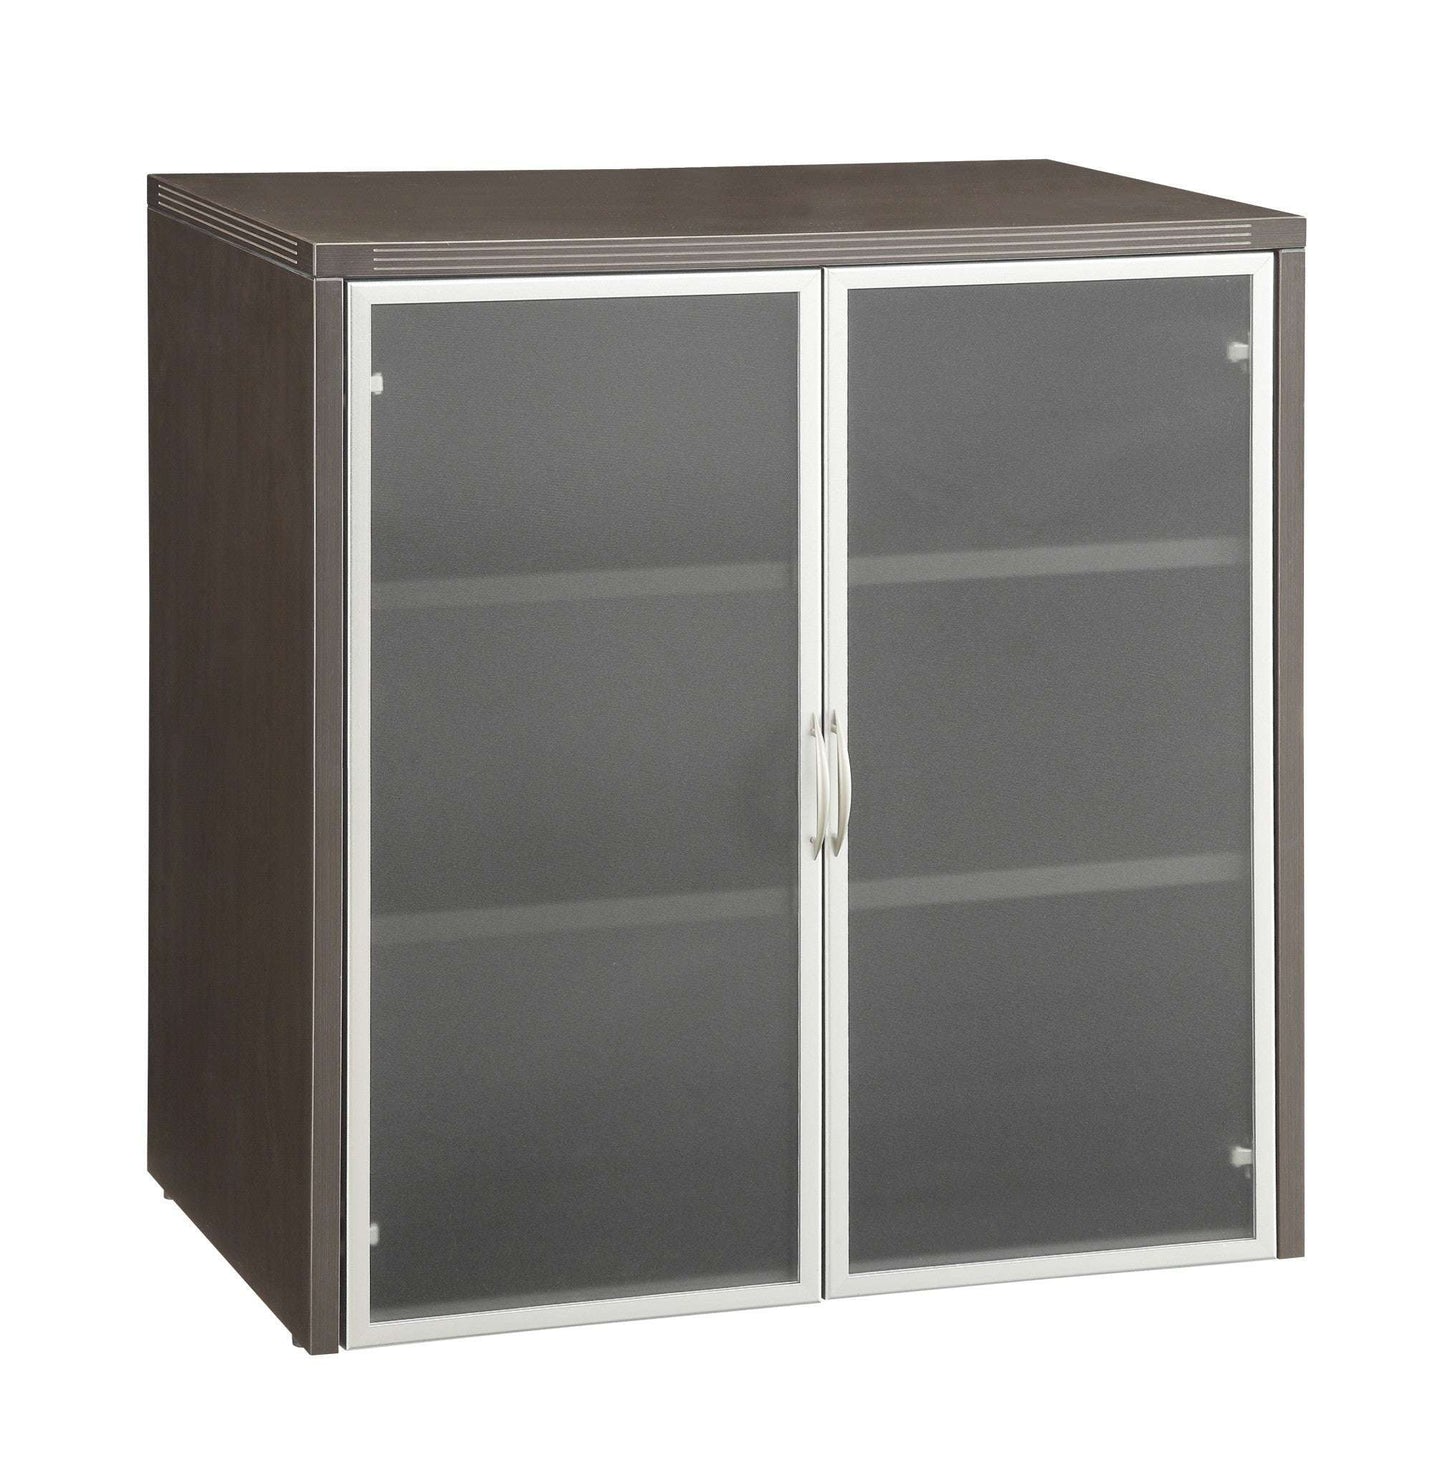 New Napa Series 37"H Storage Cabinet with Glass & Aluminum Doors by Office Star